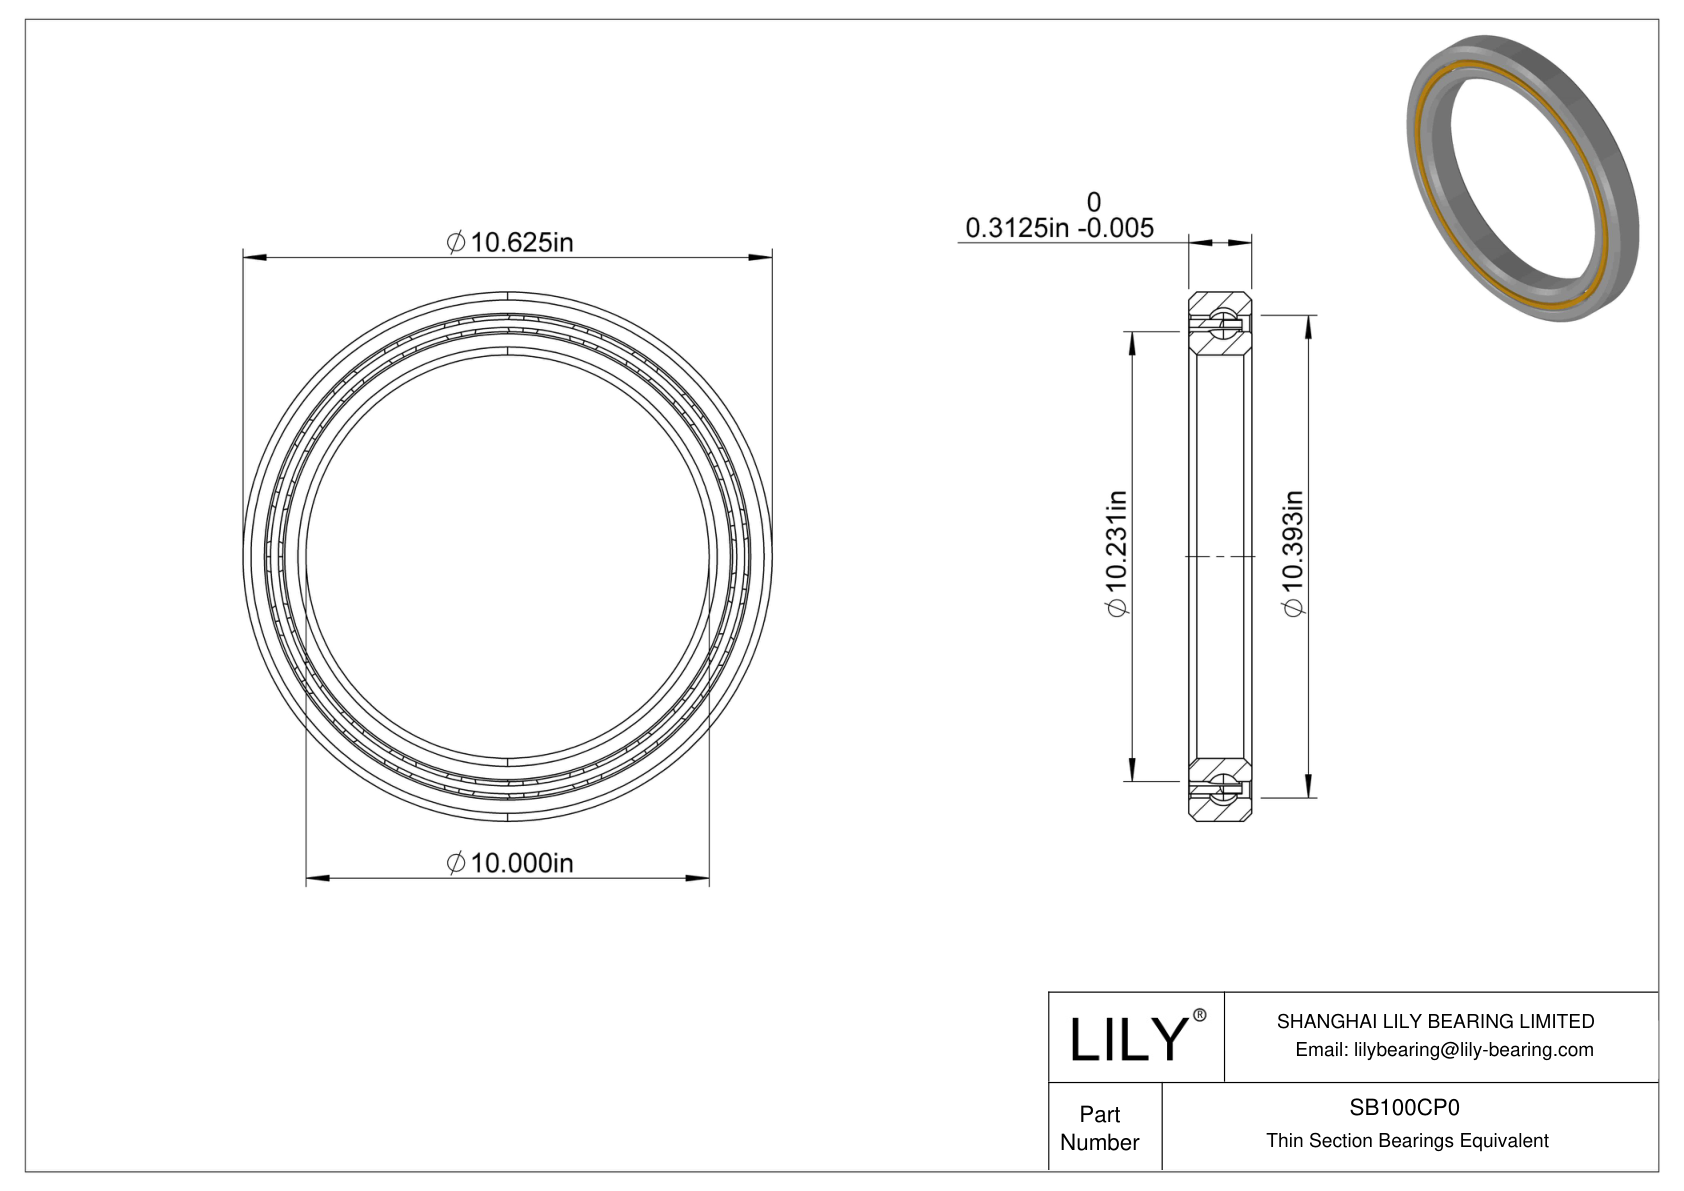 SB100CP0 Constant Section (CS) Bearings CAD图形